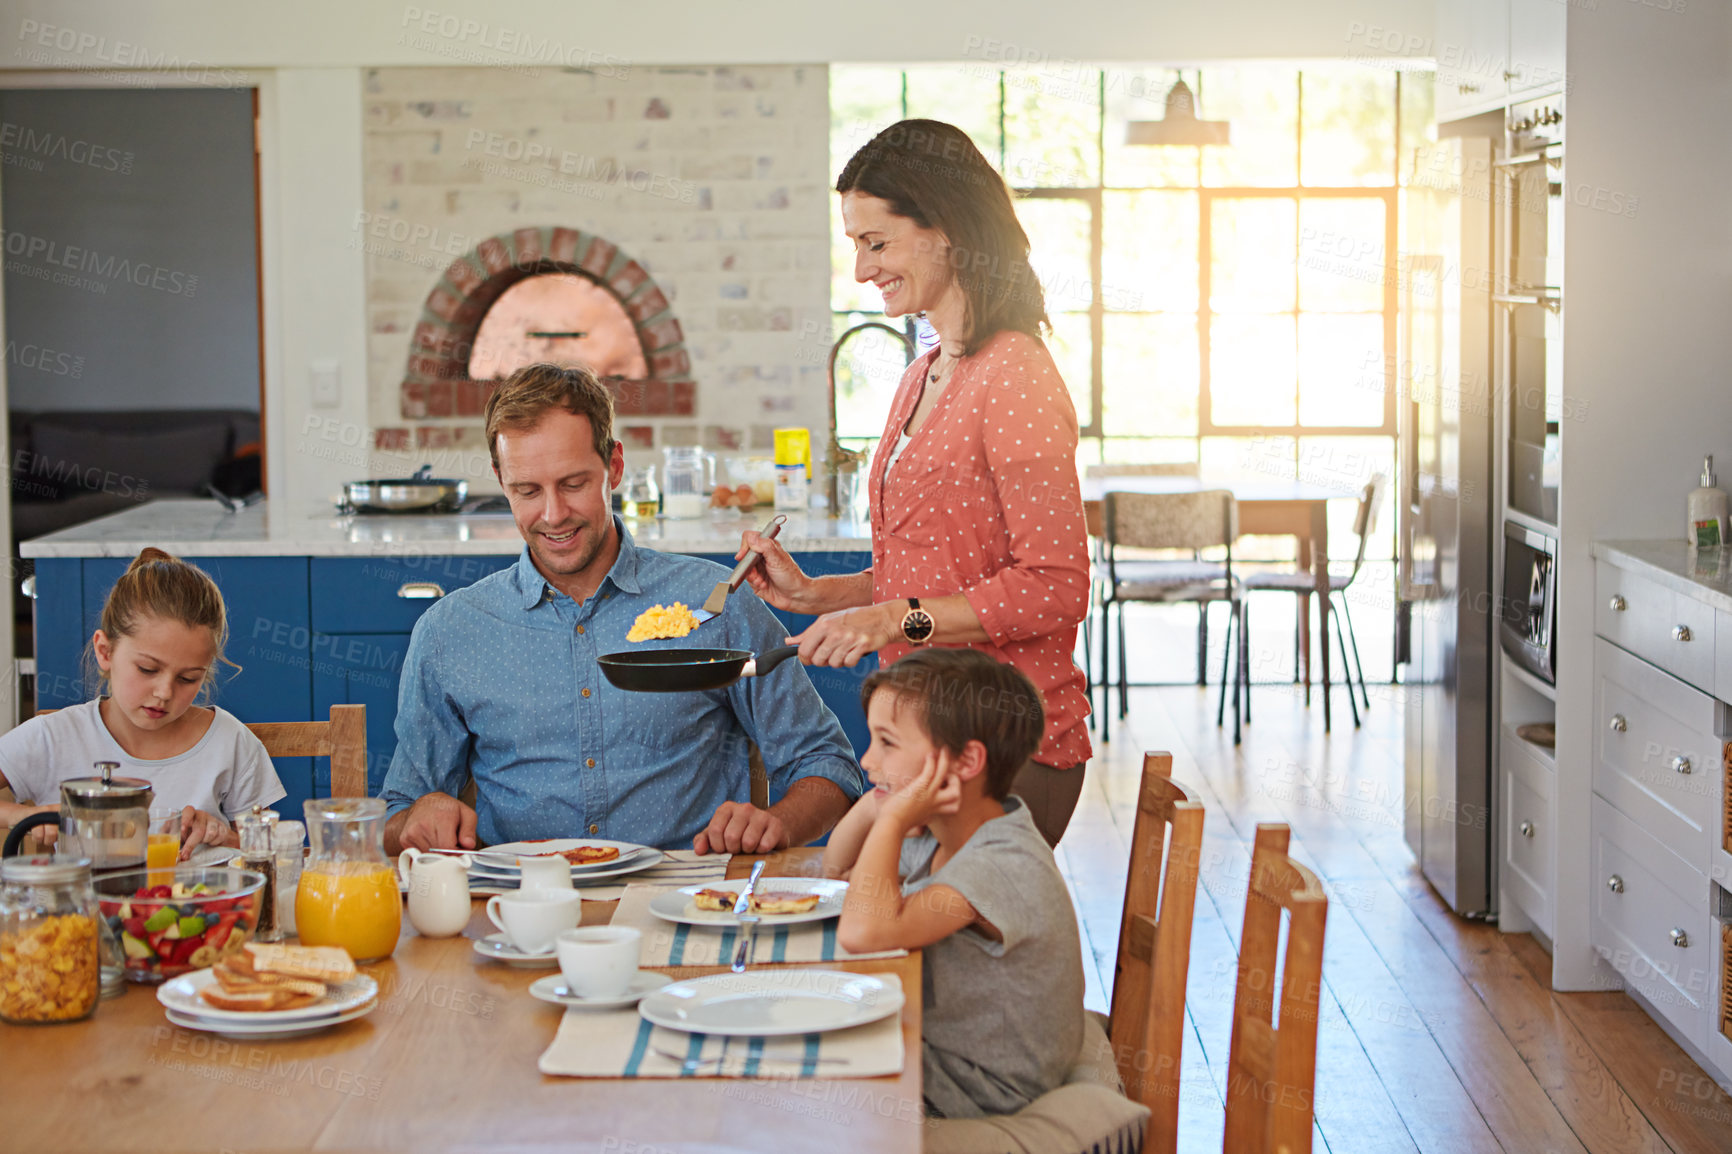 Buy stock photo Breakfast, eggs and morning with a family in the dining room of their home together for health or nutrition. Mom, dad and sibling children eating food at a table in the apartment for love or bonding